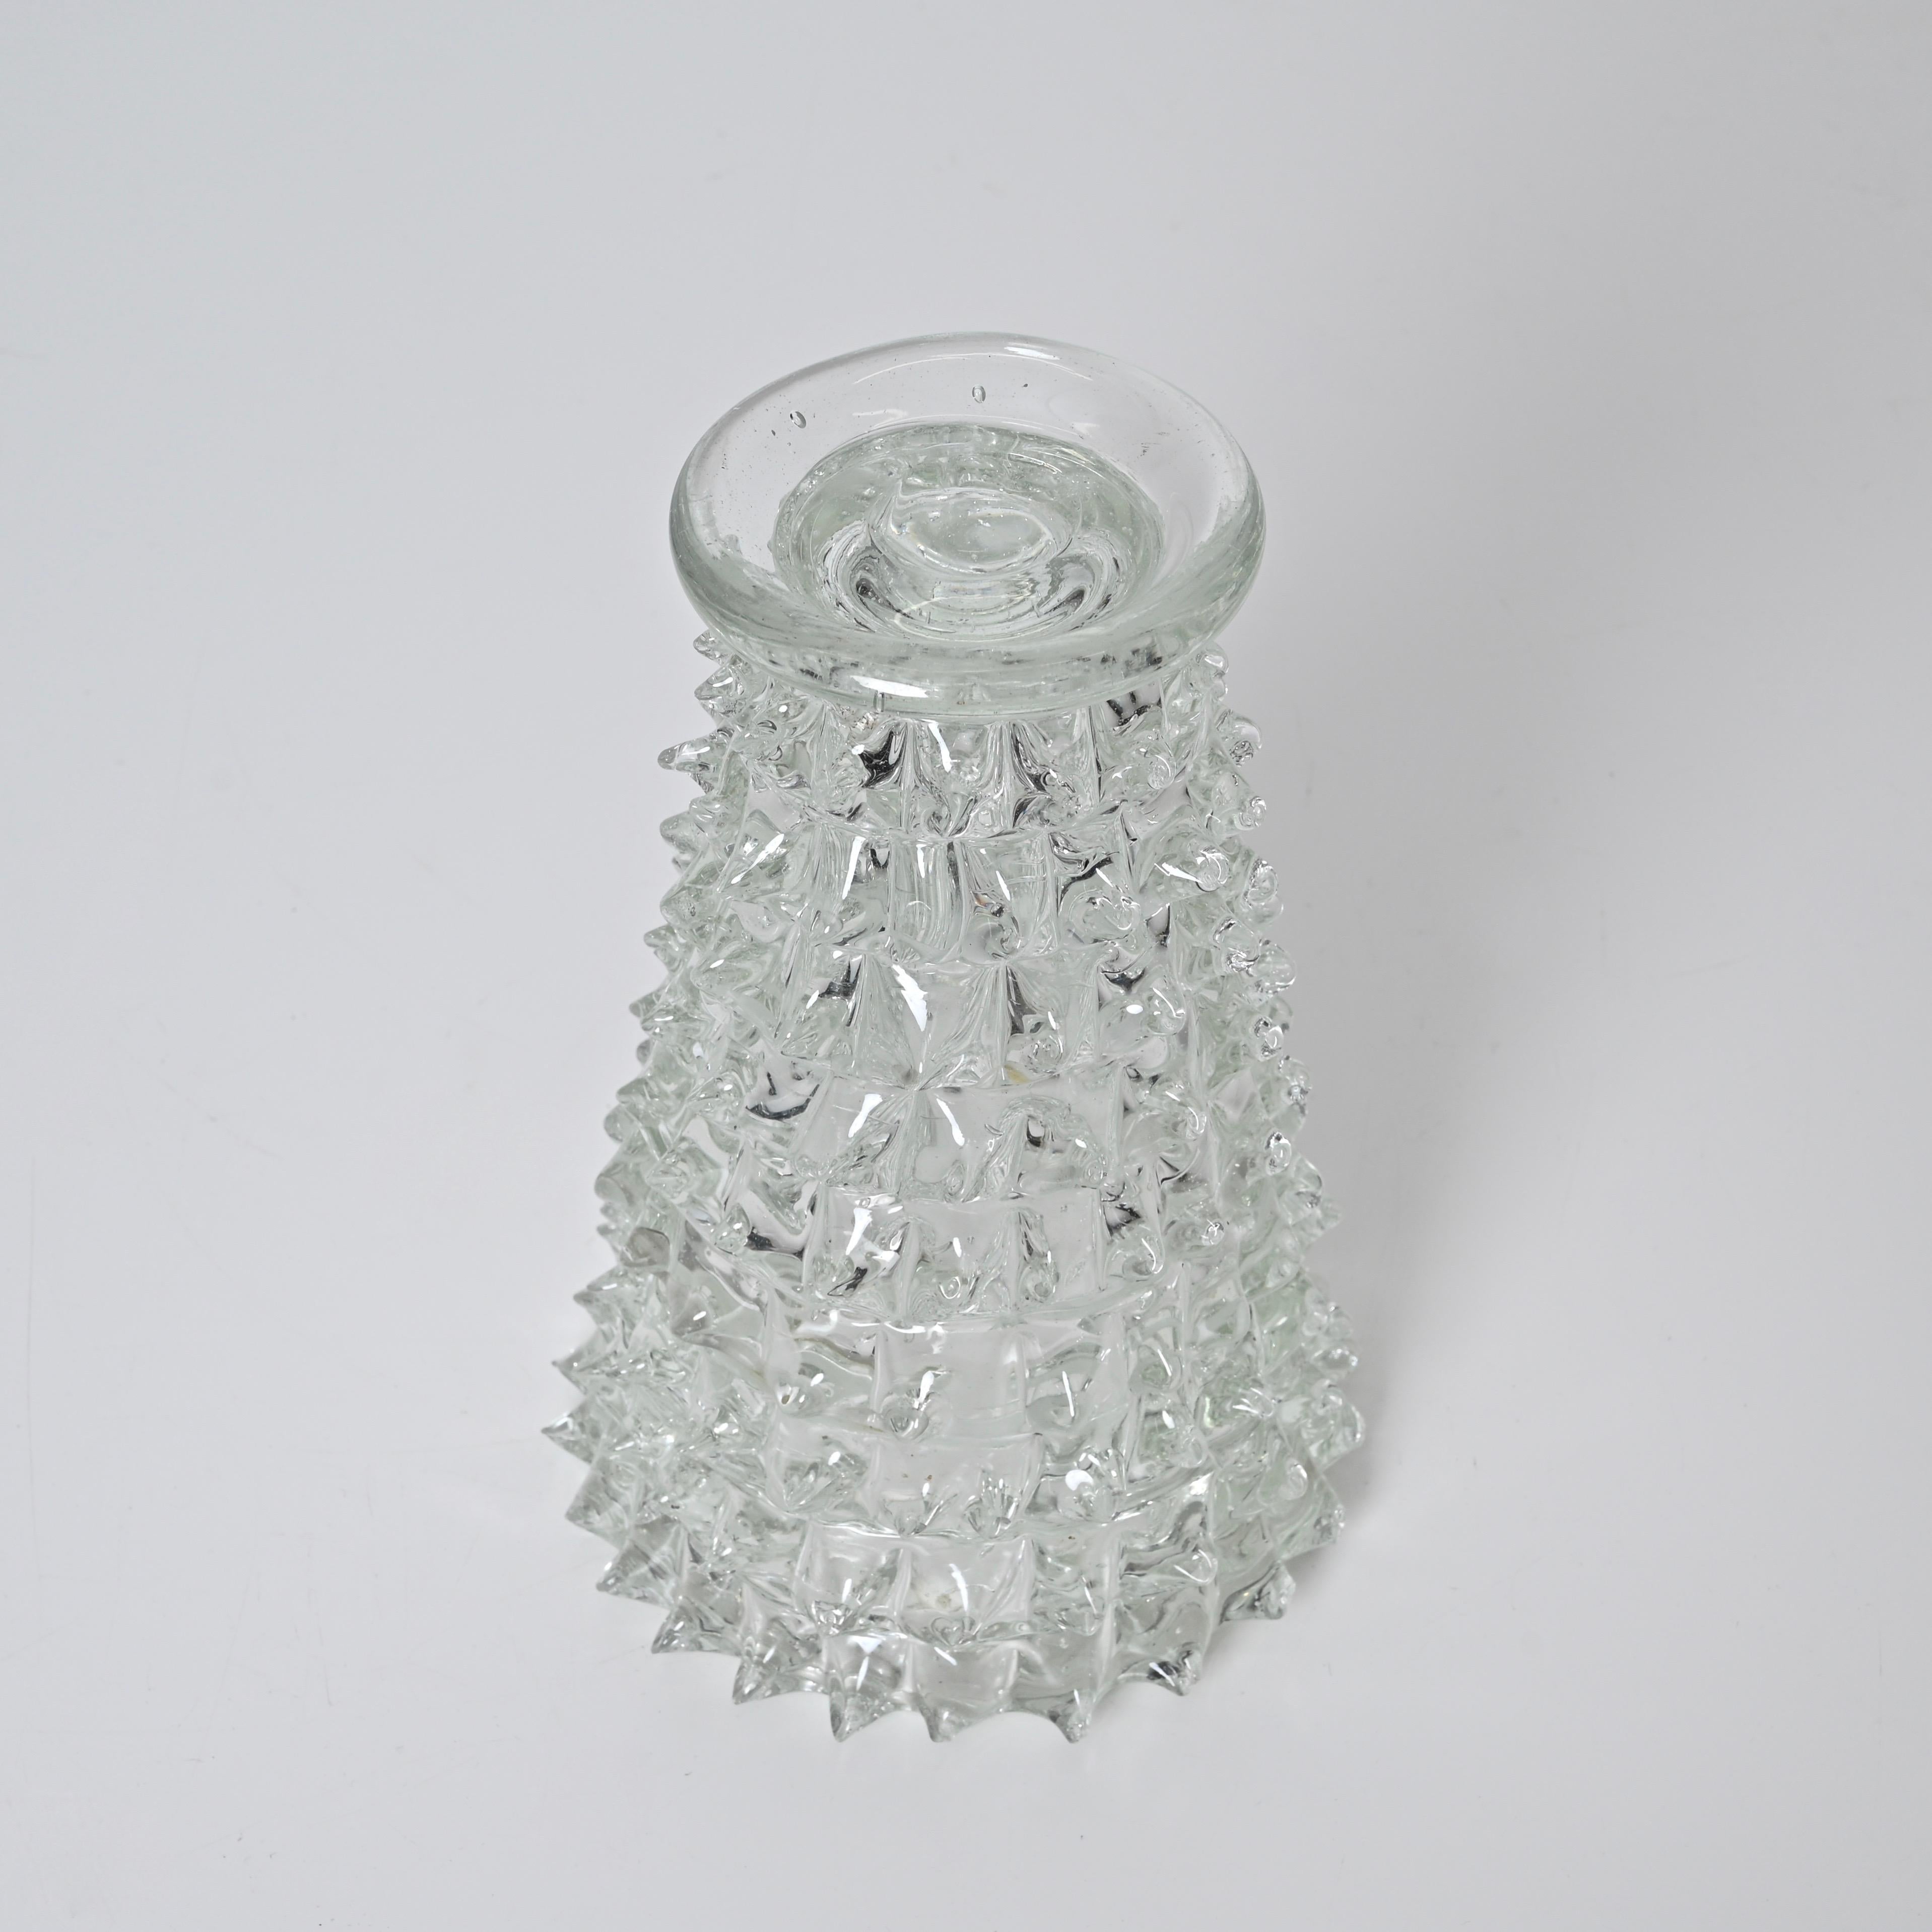 Rostrato Murano Glass Vase by Ercole Barovier for Barovier & Toso, Italy 1940s 3